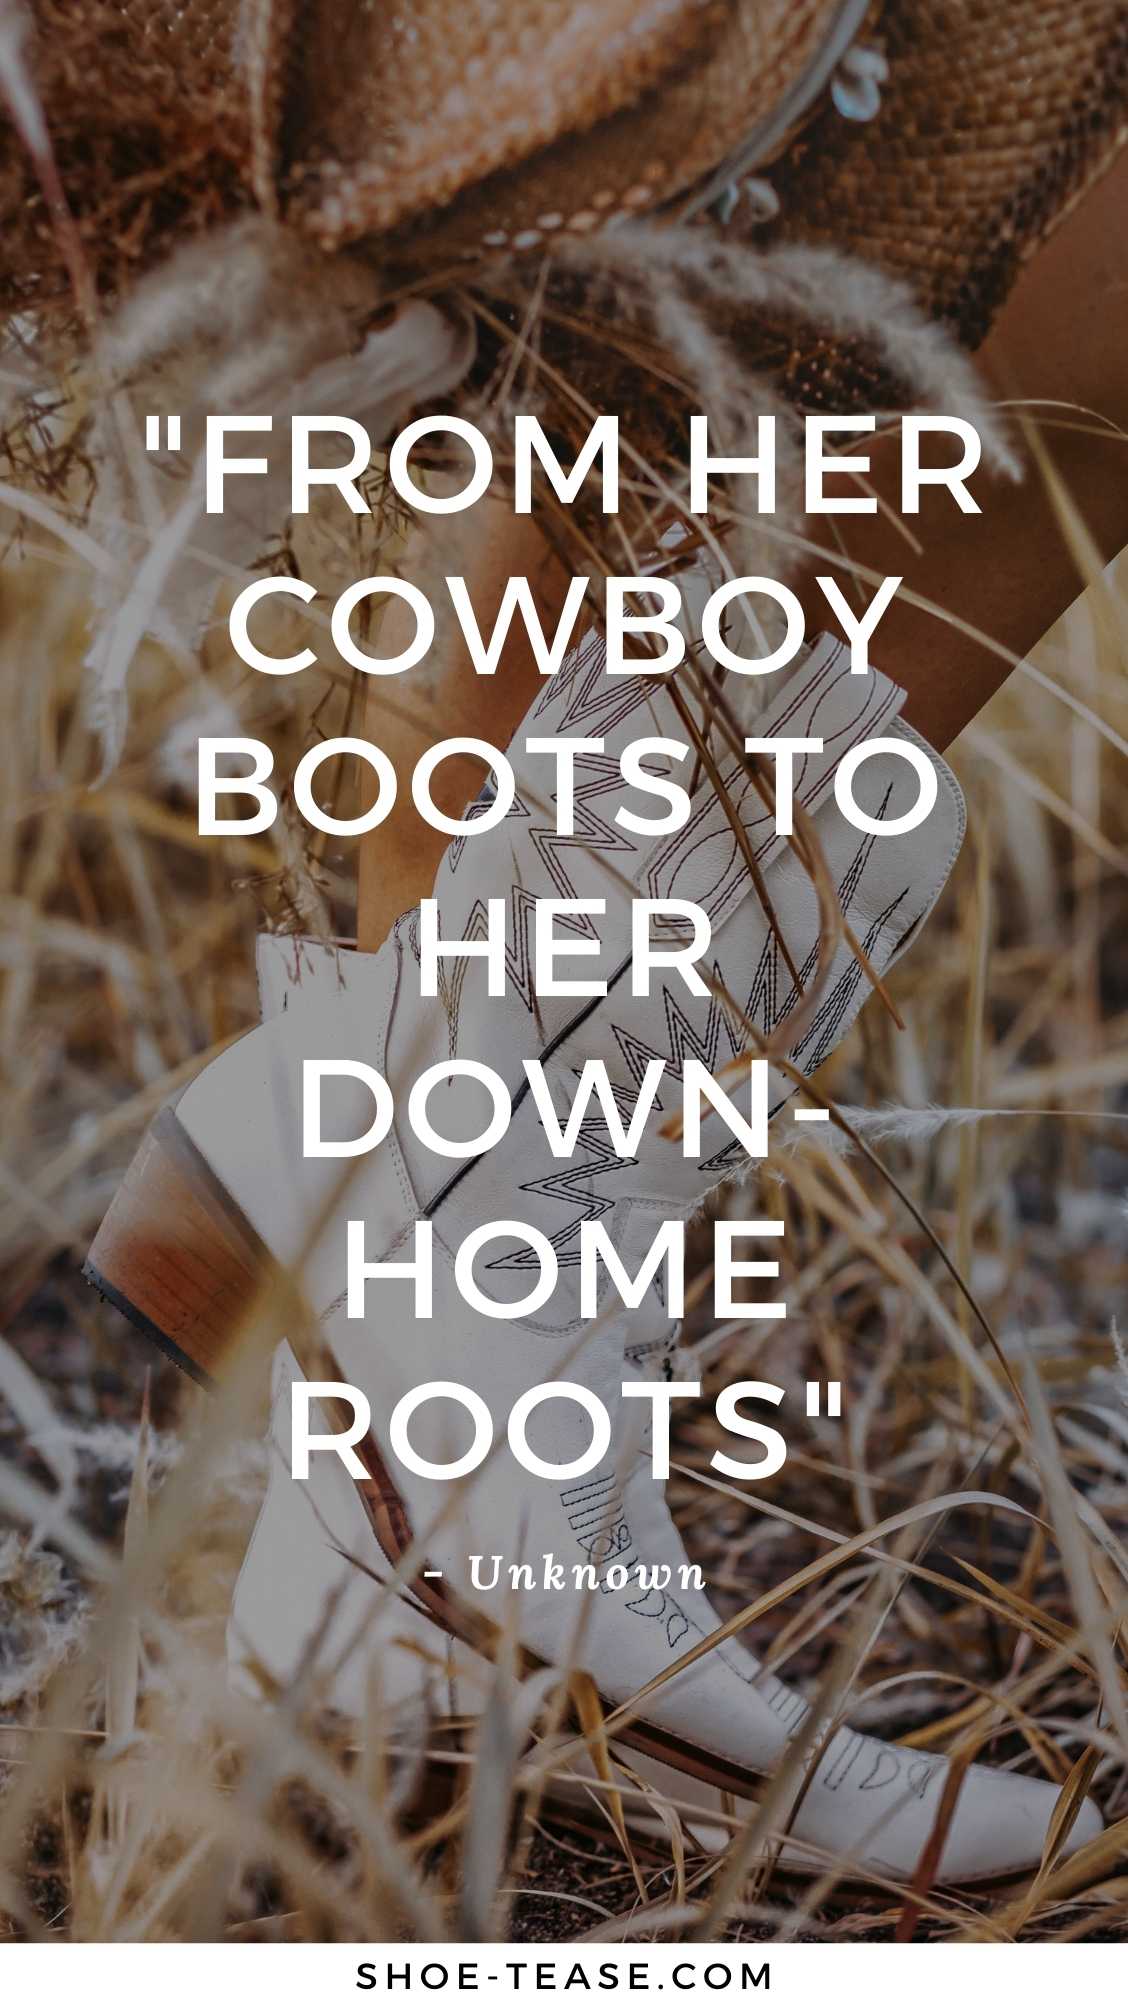 Cowboy boot quotes text reading from her cowboy boots to her down home roots by unknown over darkened image of woman walking in white cowboy boots.